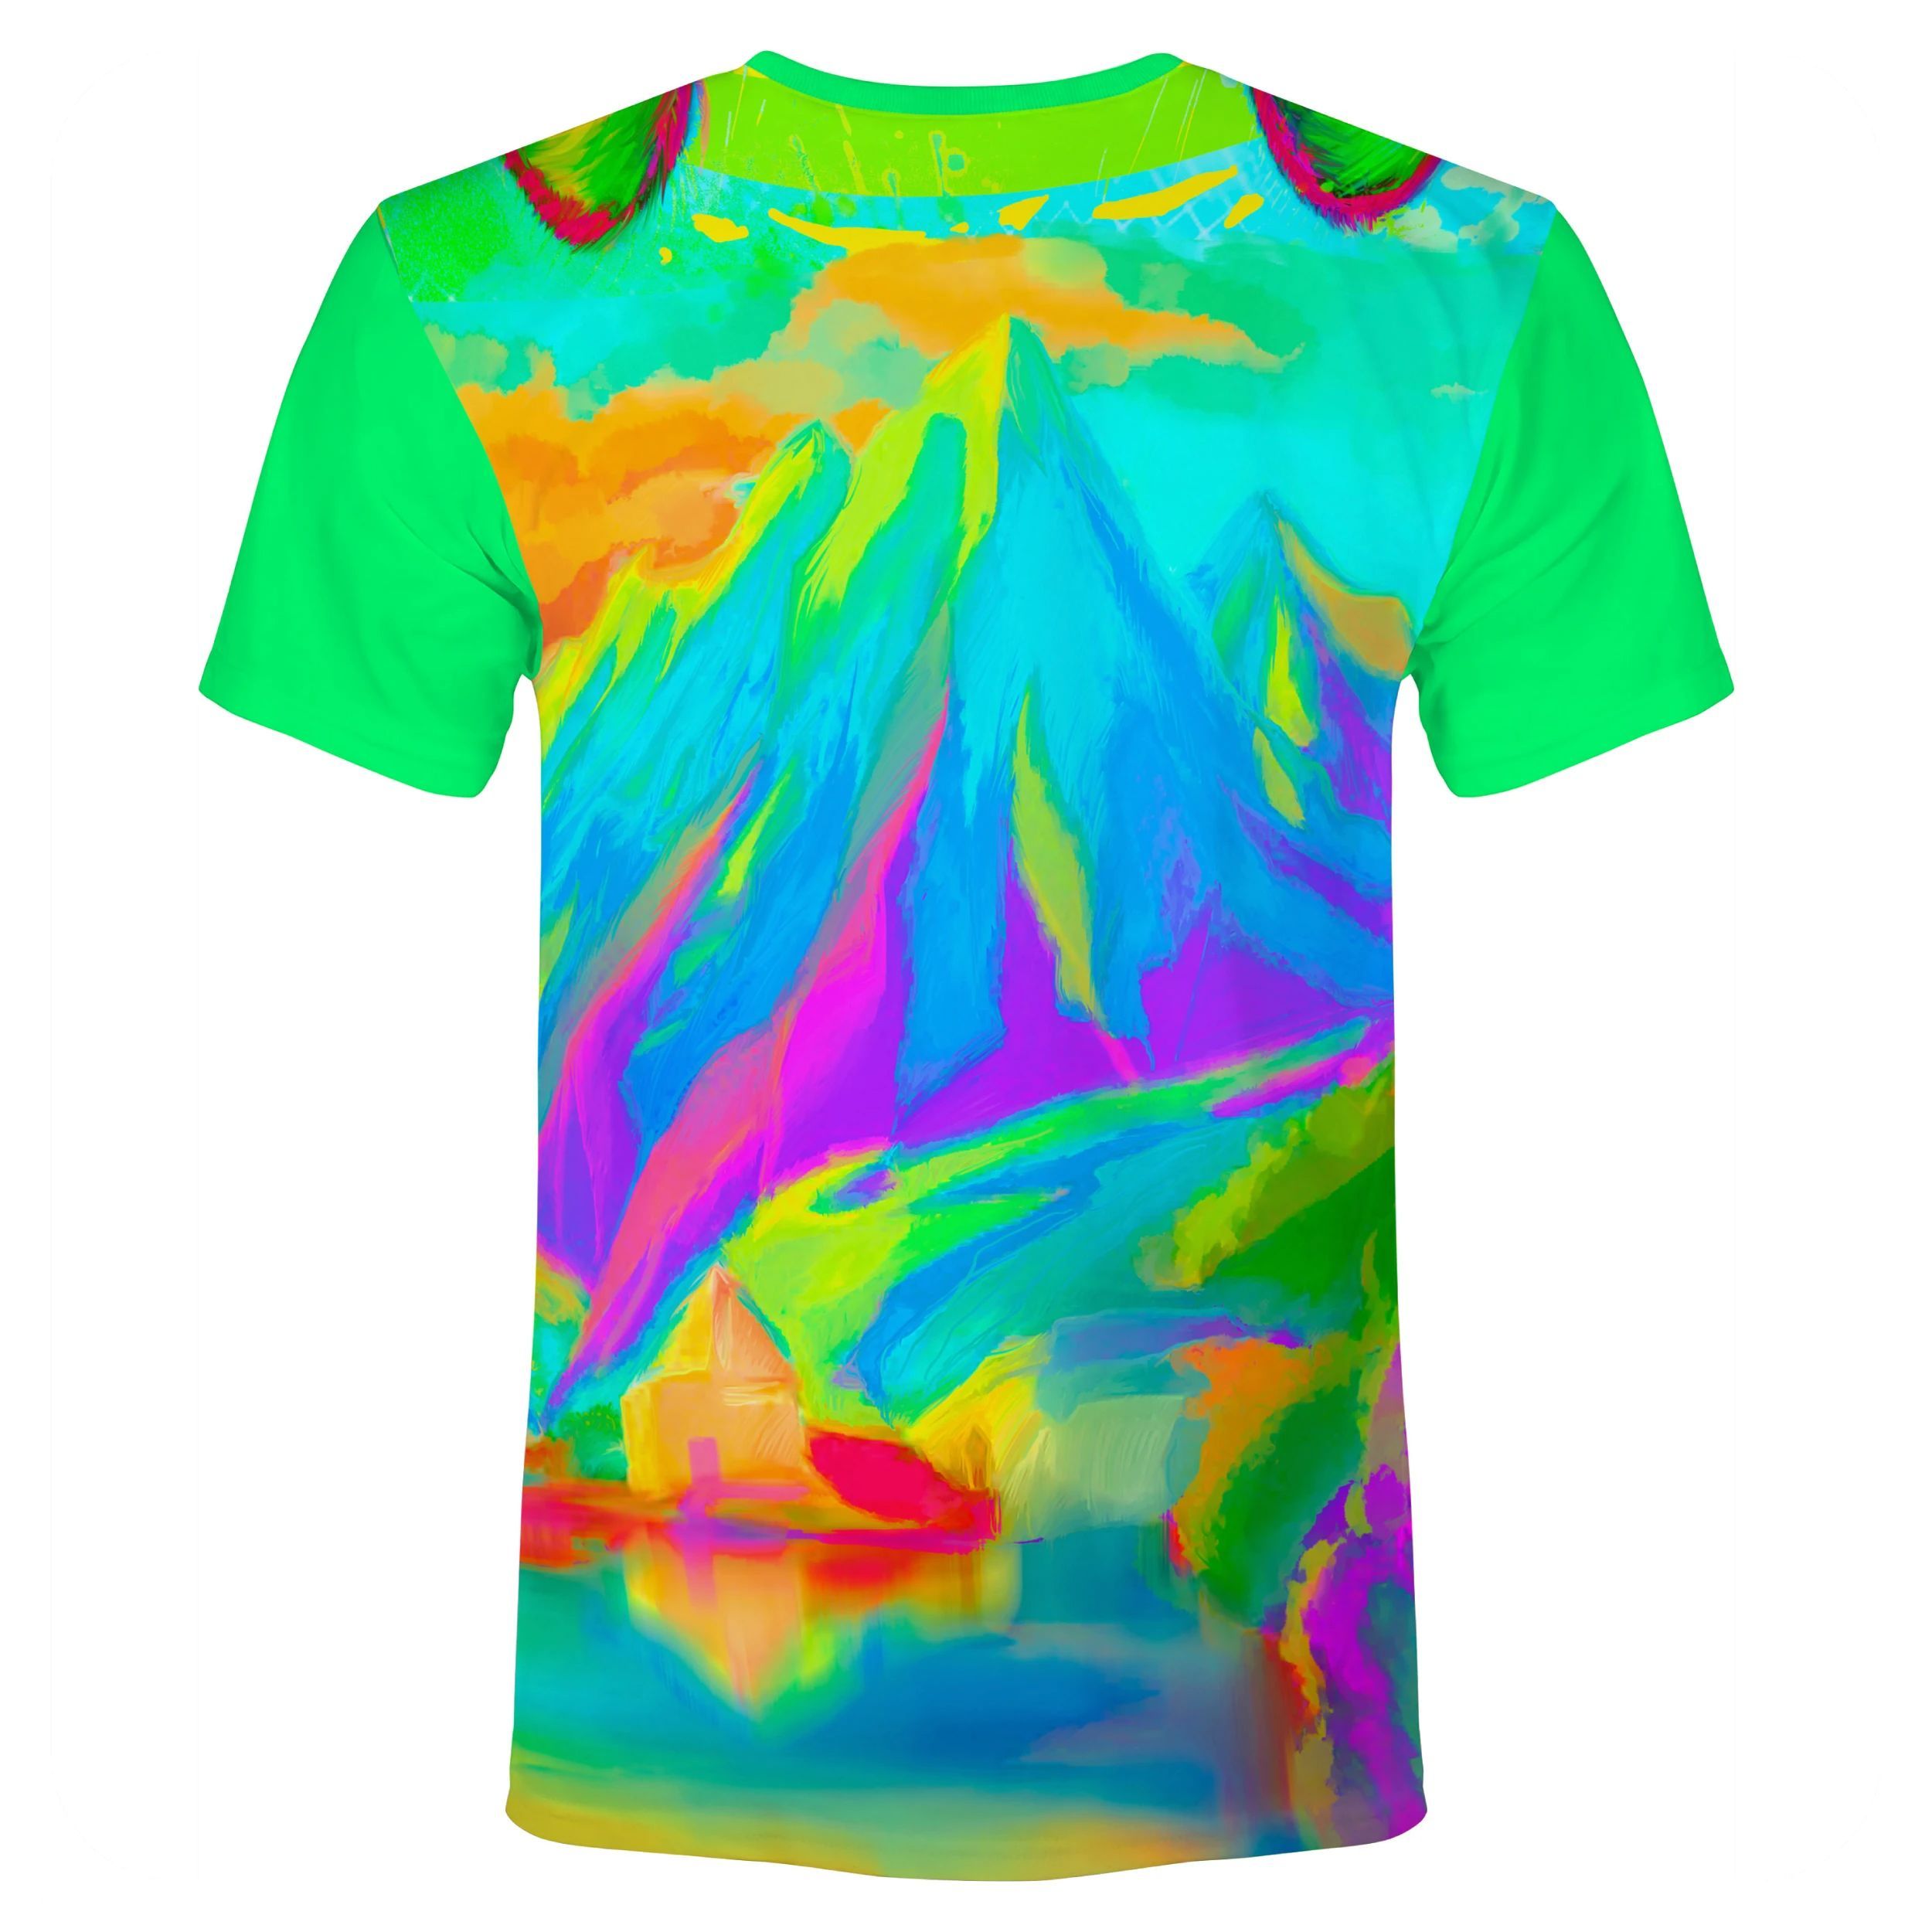 Psychedelic Festival Clothing Glow Cats Cats Cats ts7